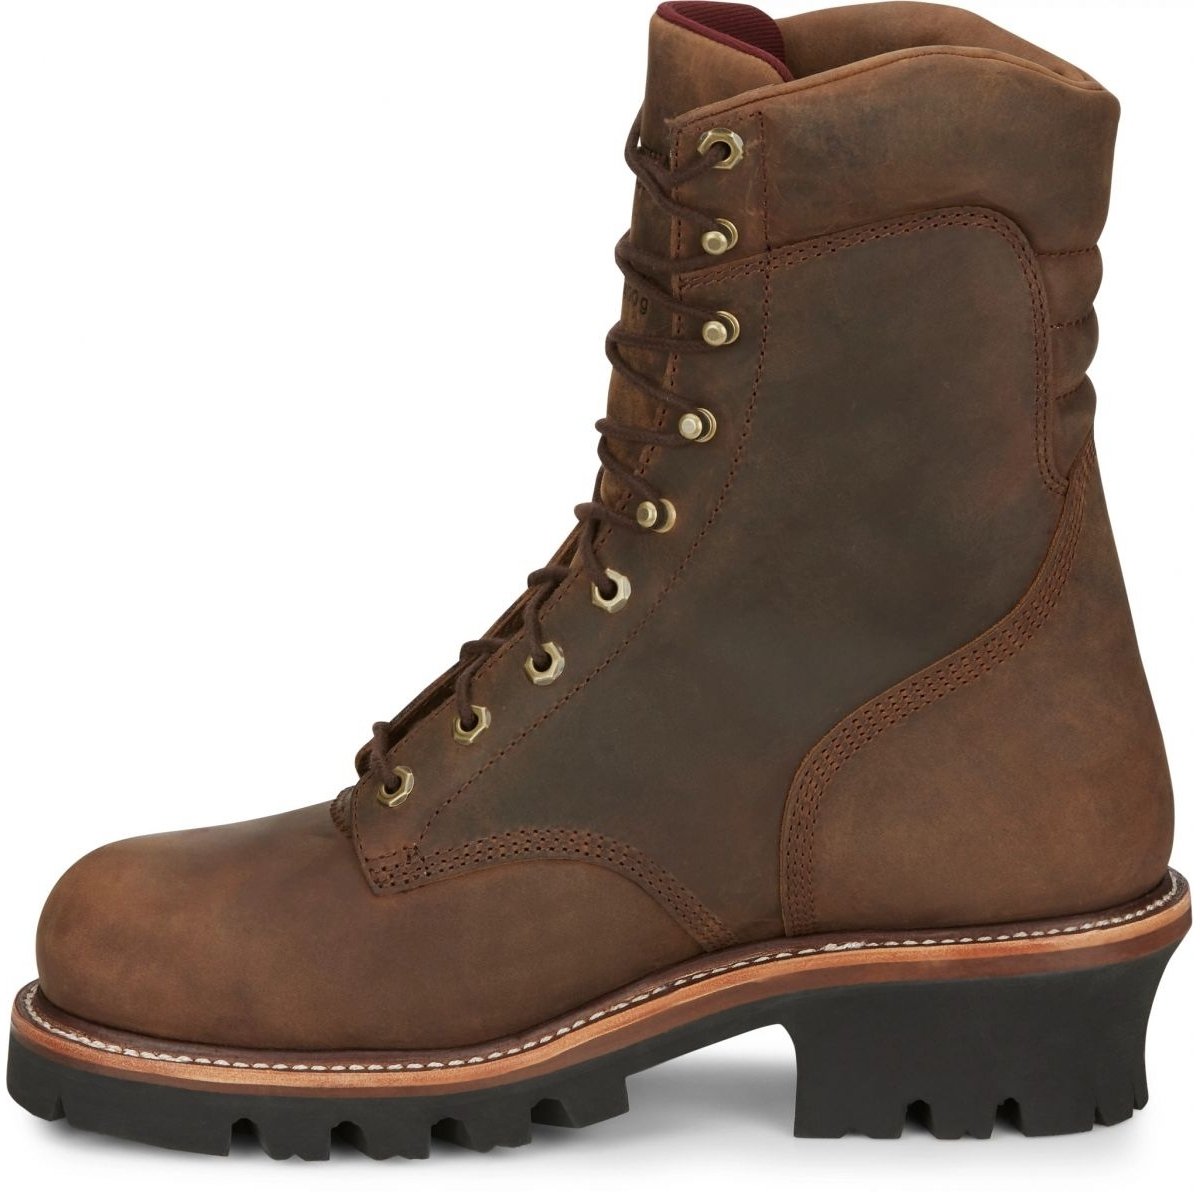 Chippewa Men's 9 Super DNA Steel Toe Waterproof Insulated Logger Work Boot Bay Apache - 59405 ONE SIZE BROWN - BROWN, 9.5 Wide